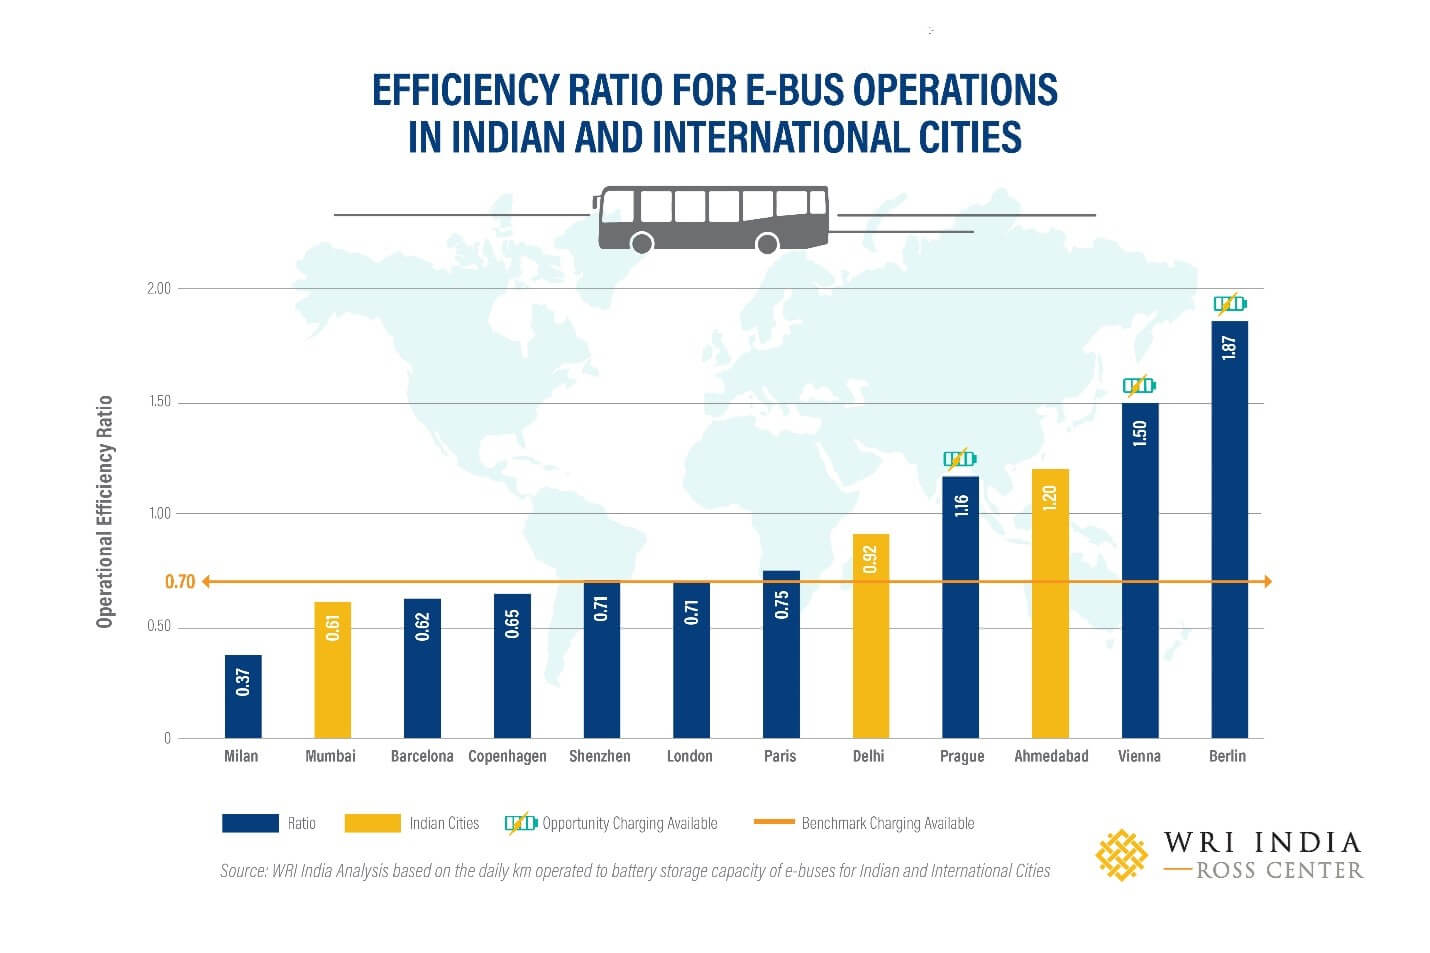 Overview of efficiency ratio for electric bus operations across key Indian and international cities